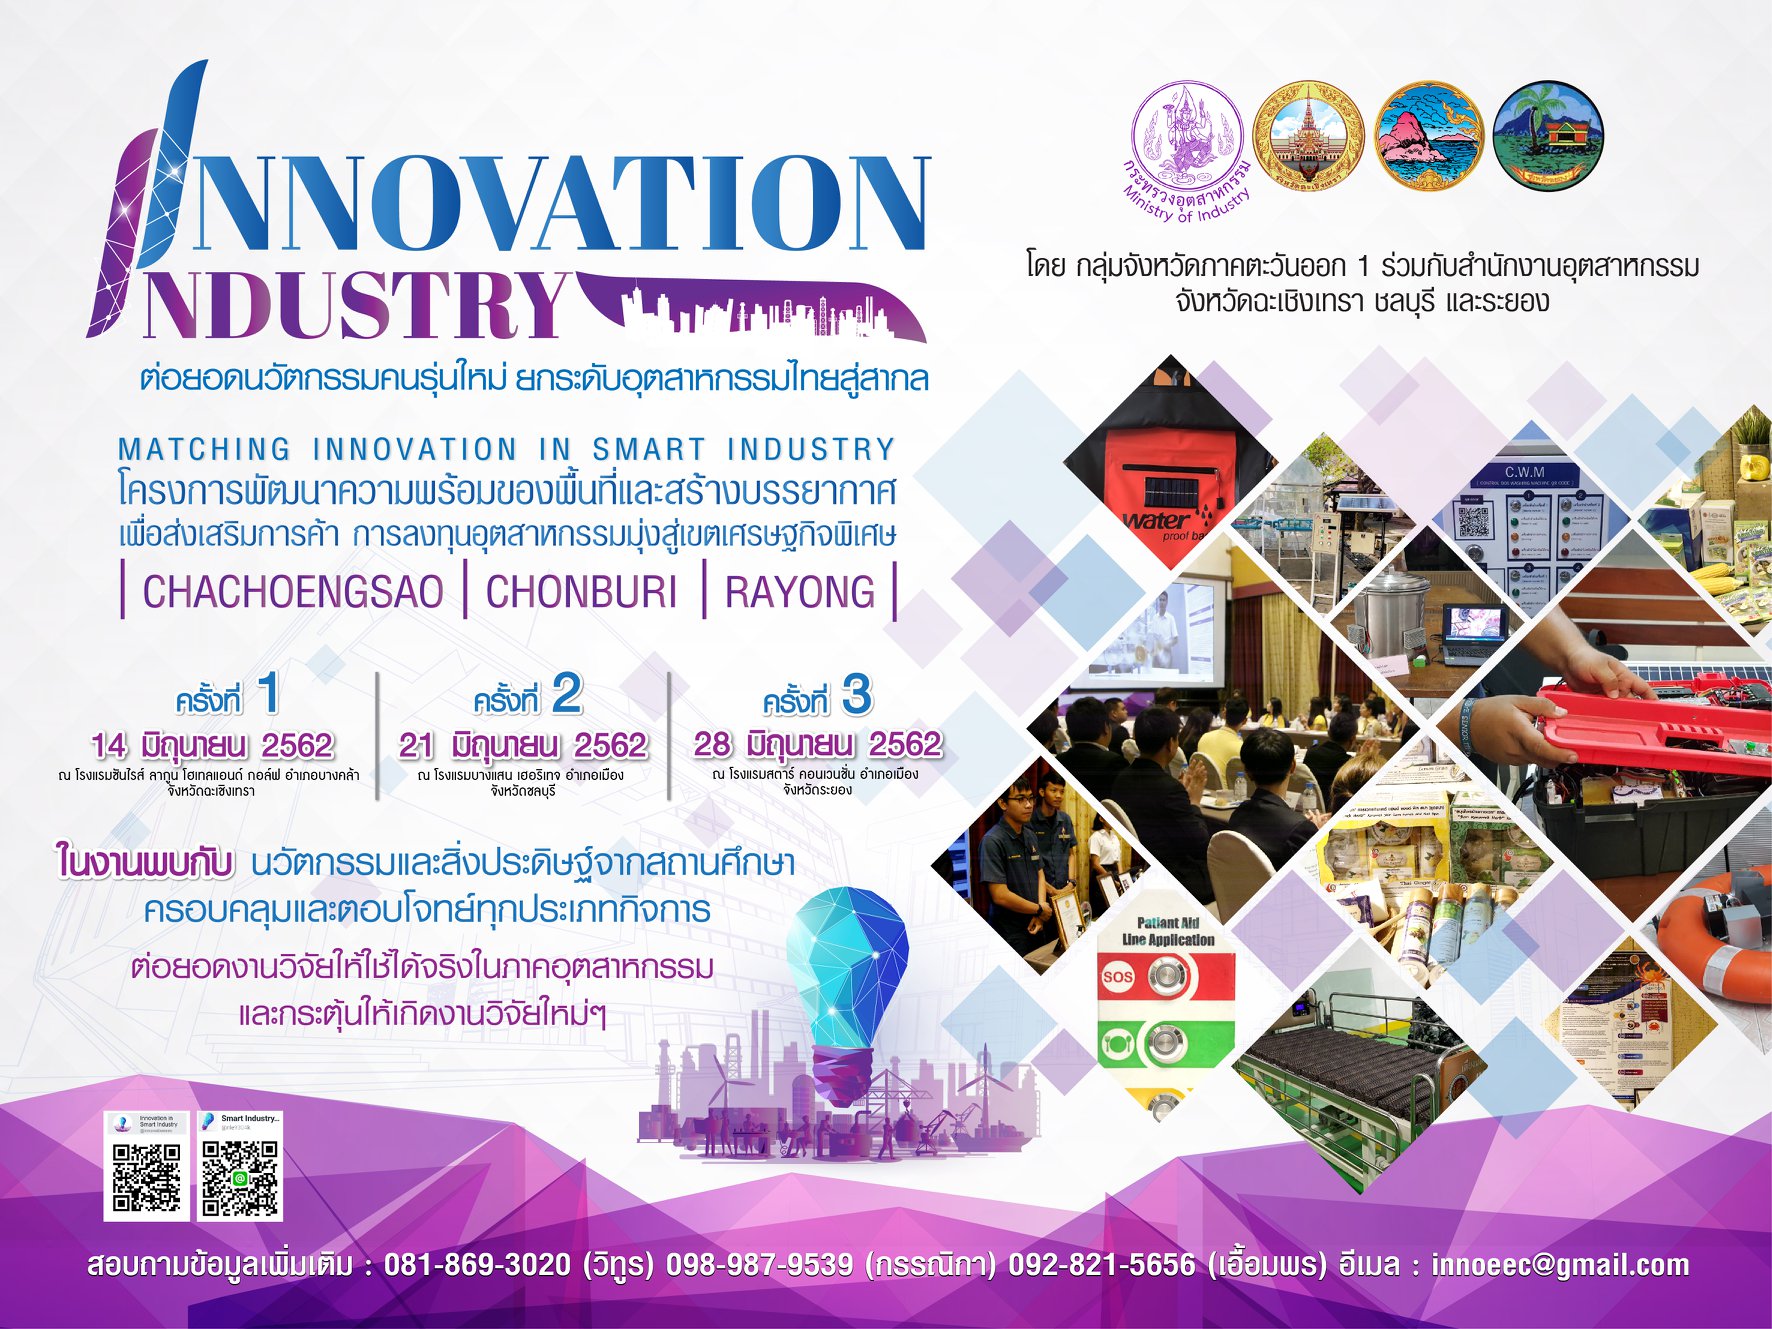 Matching Innovation in Smart Industry